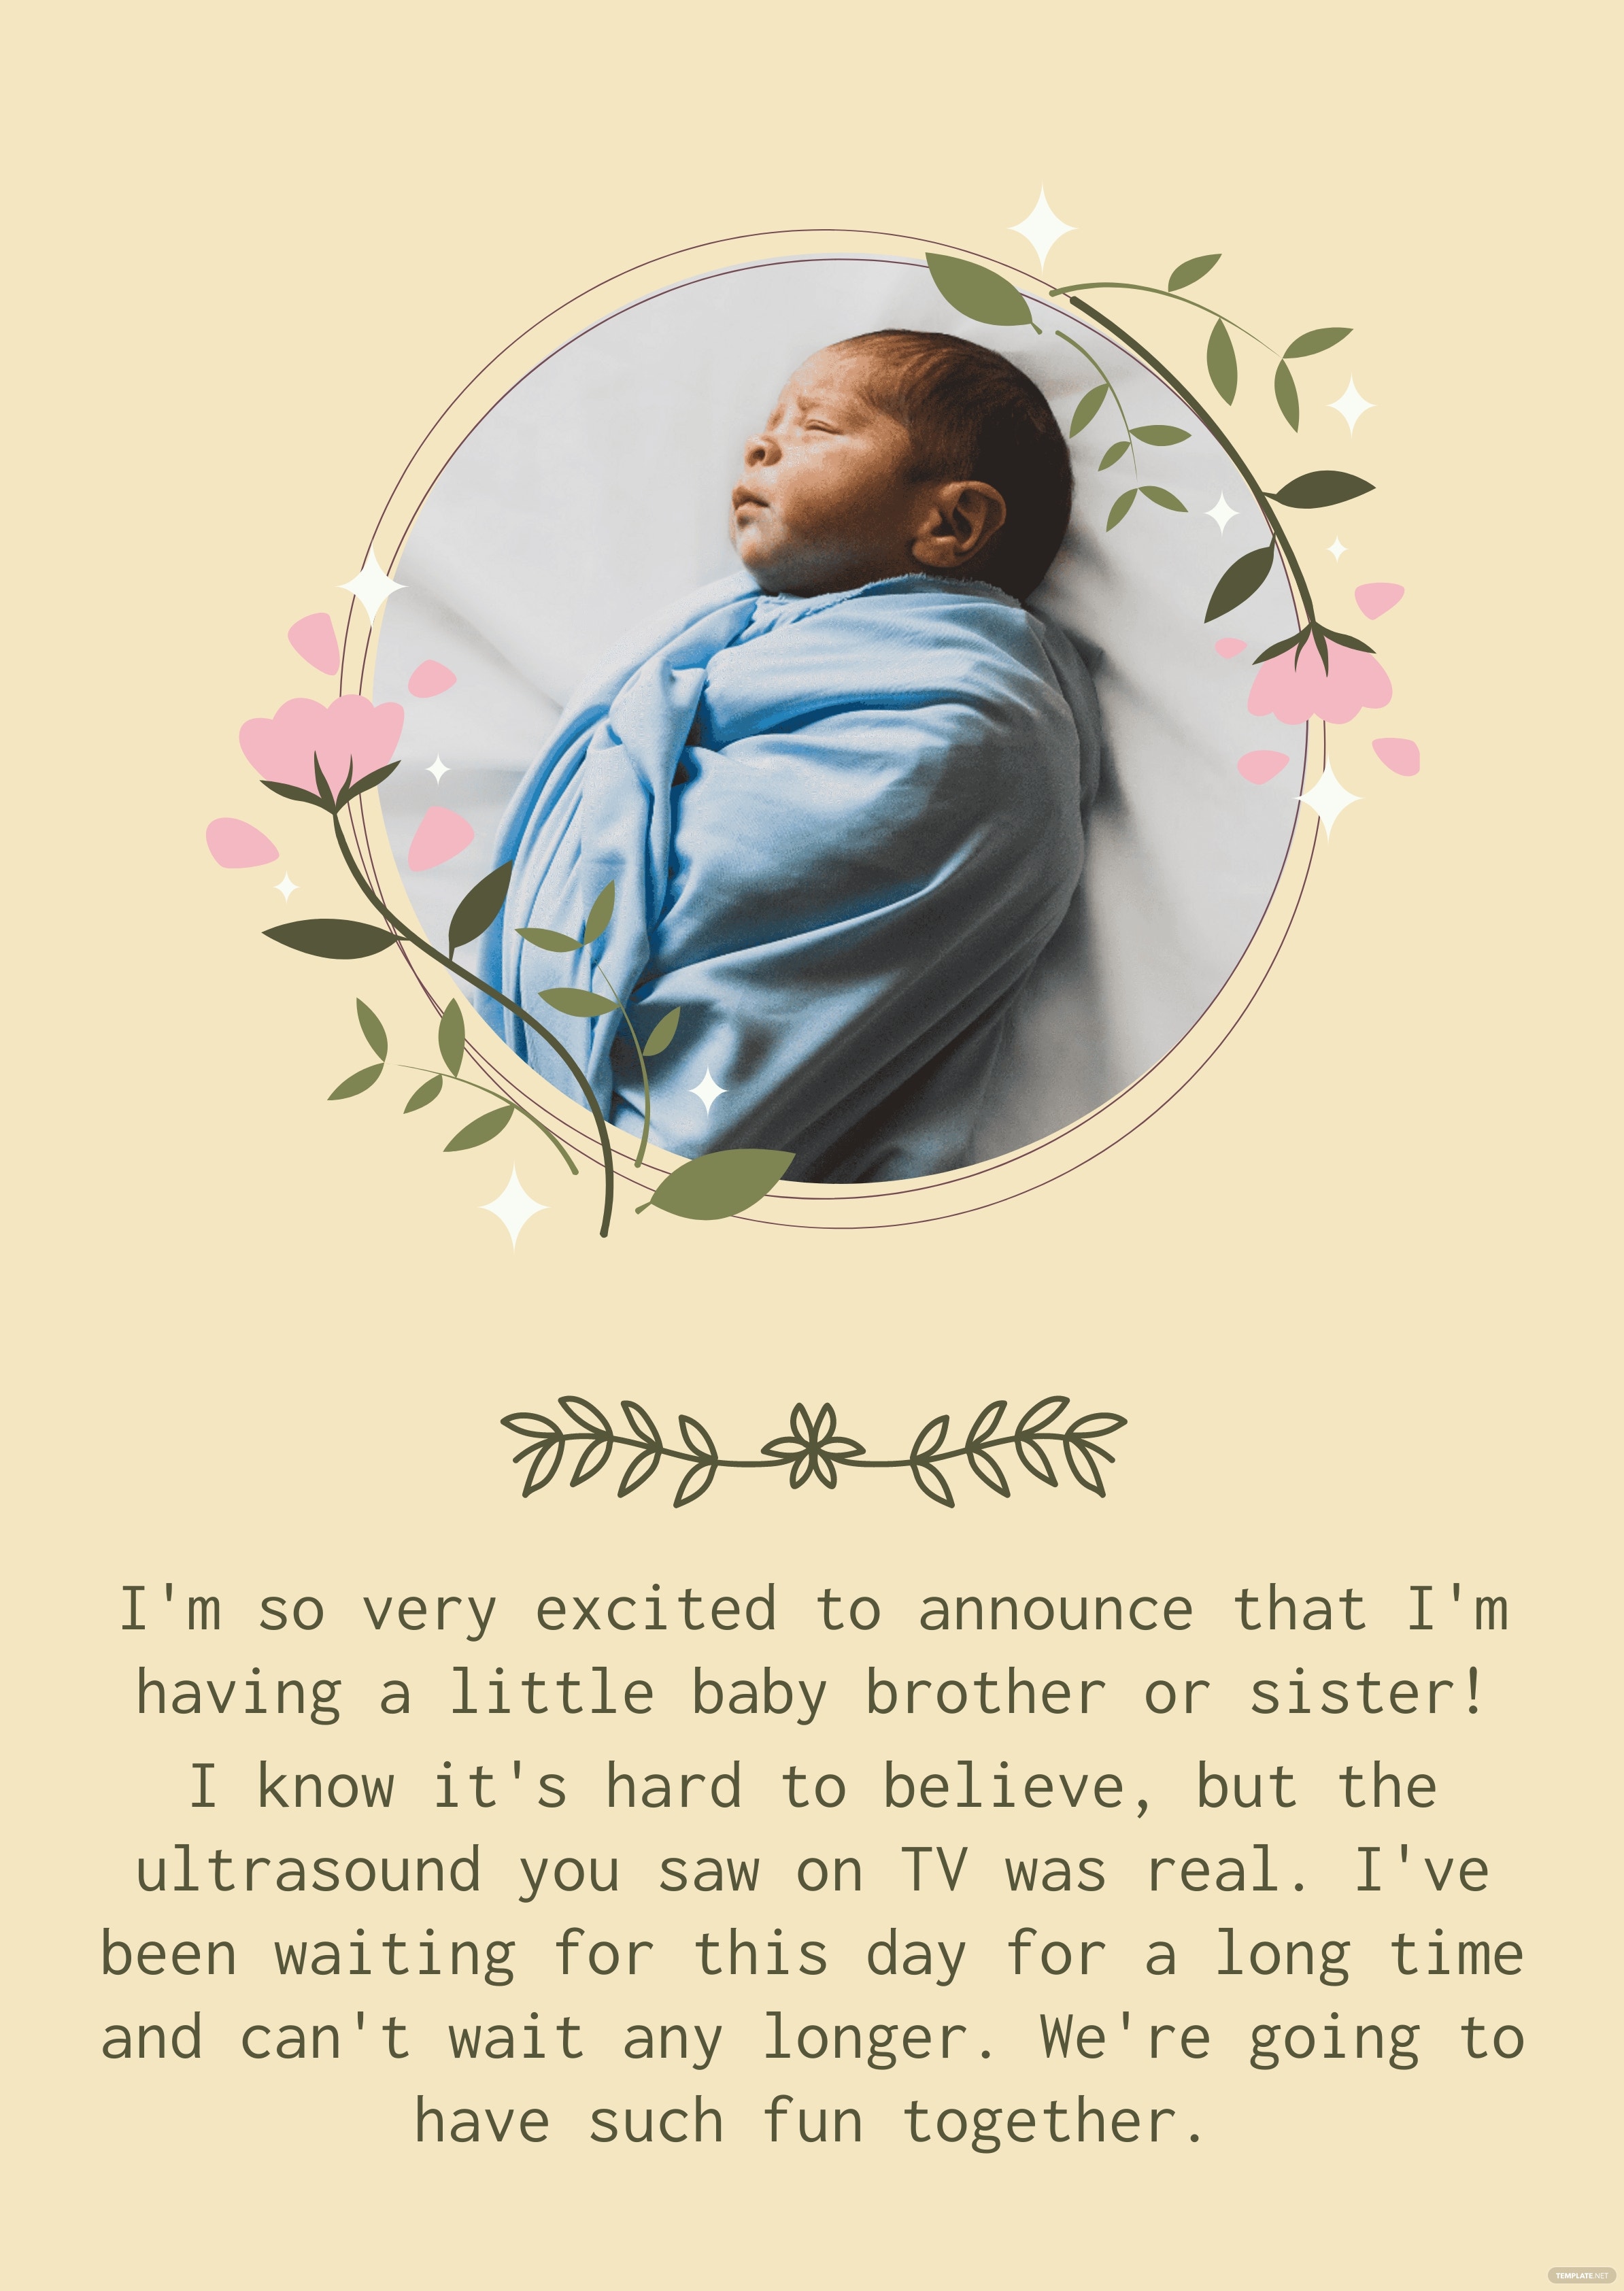 floral baby announcement ideas and examples